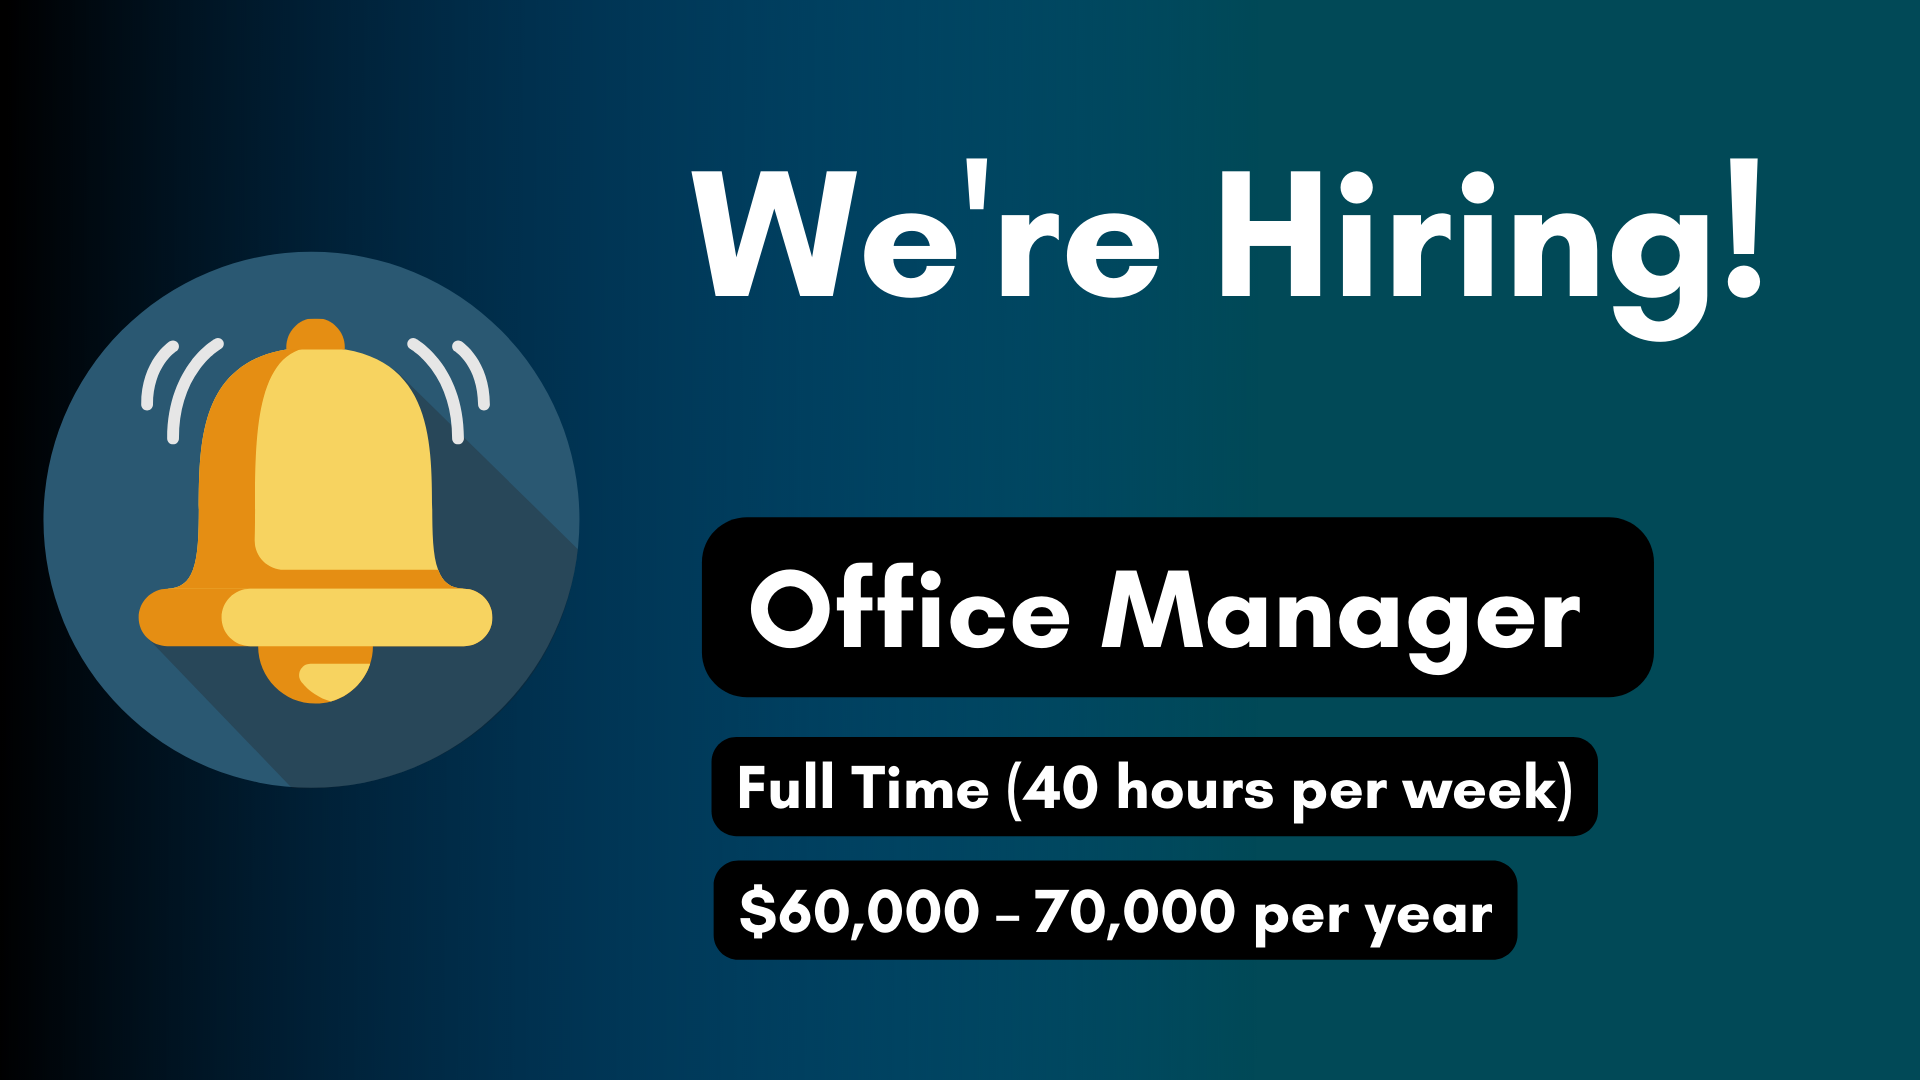 Picture of a gold bell on the left with text saying "We're Hiring. Full Time (40 hours per week).$60,000 – 70,000 per year."